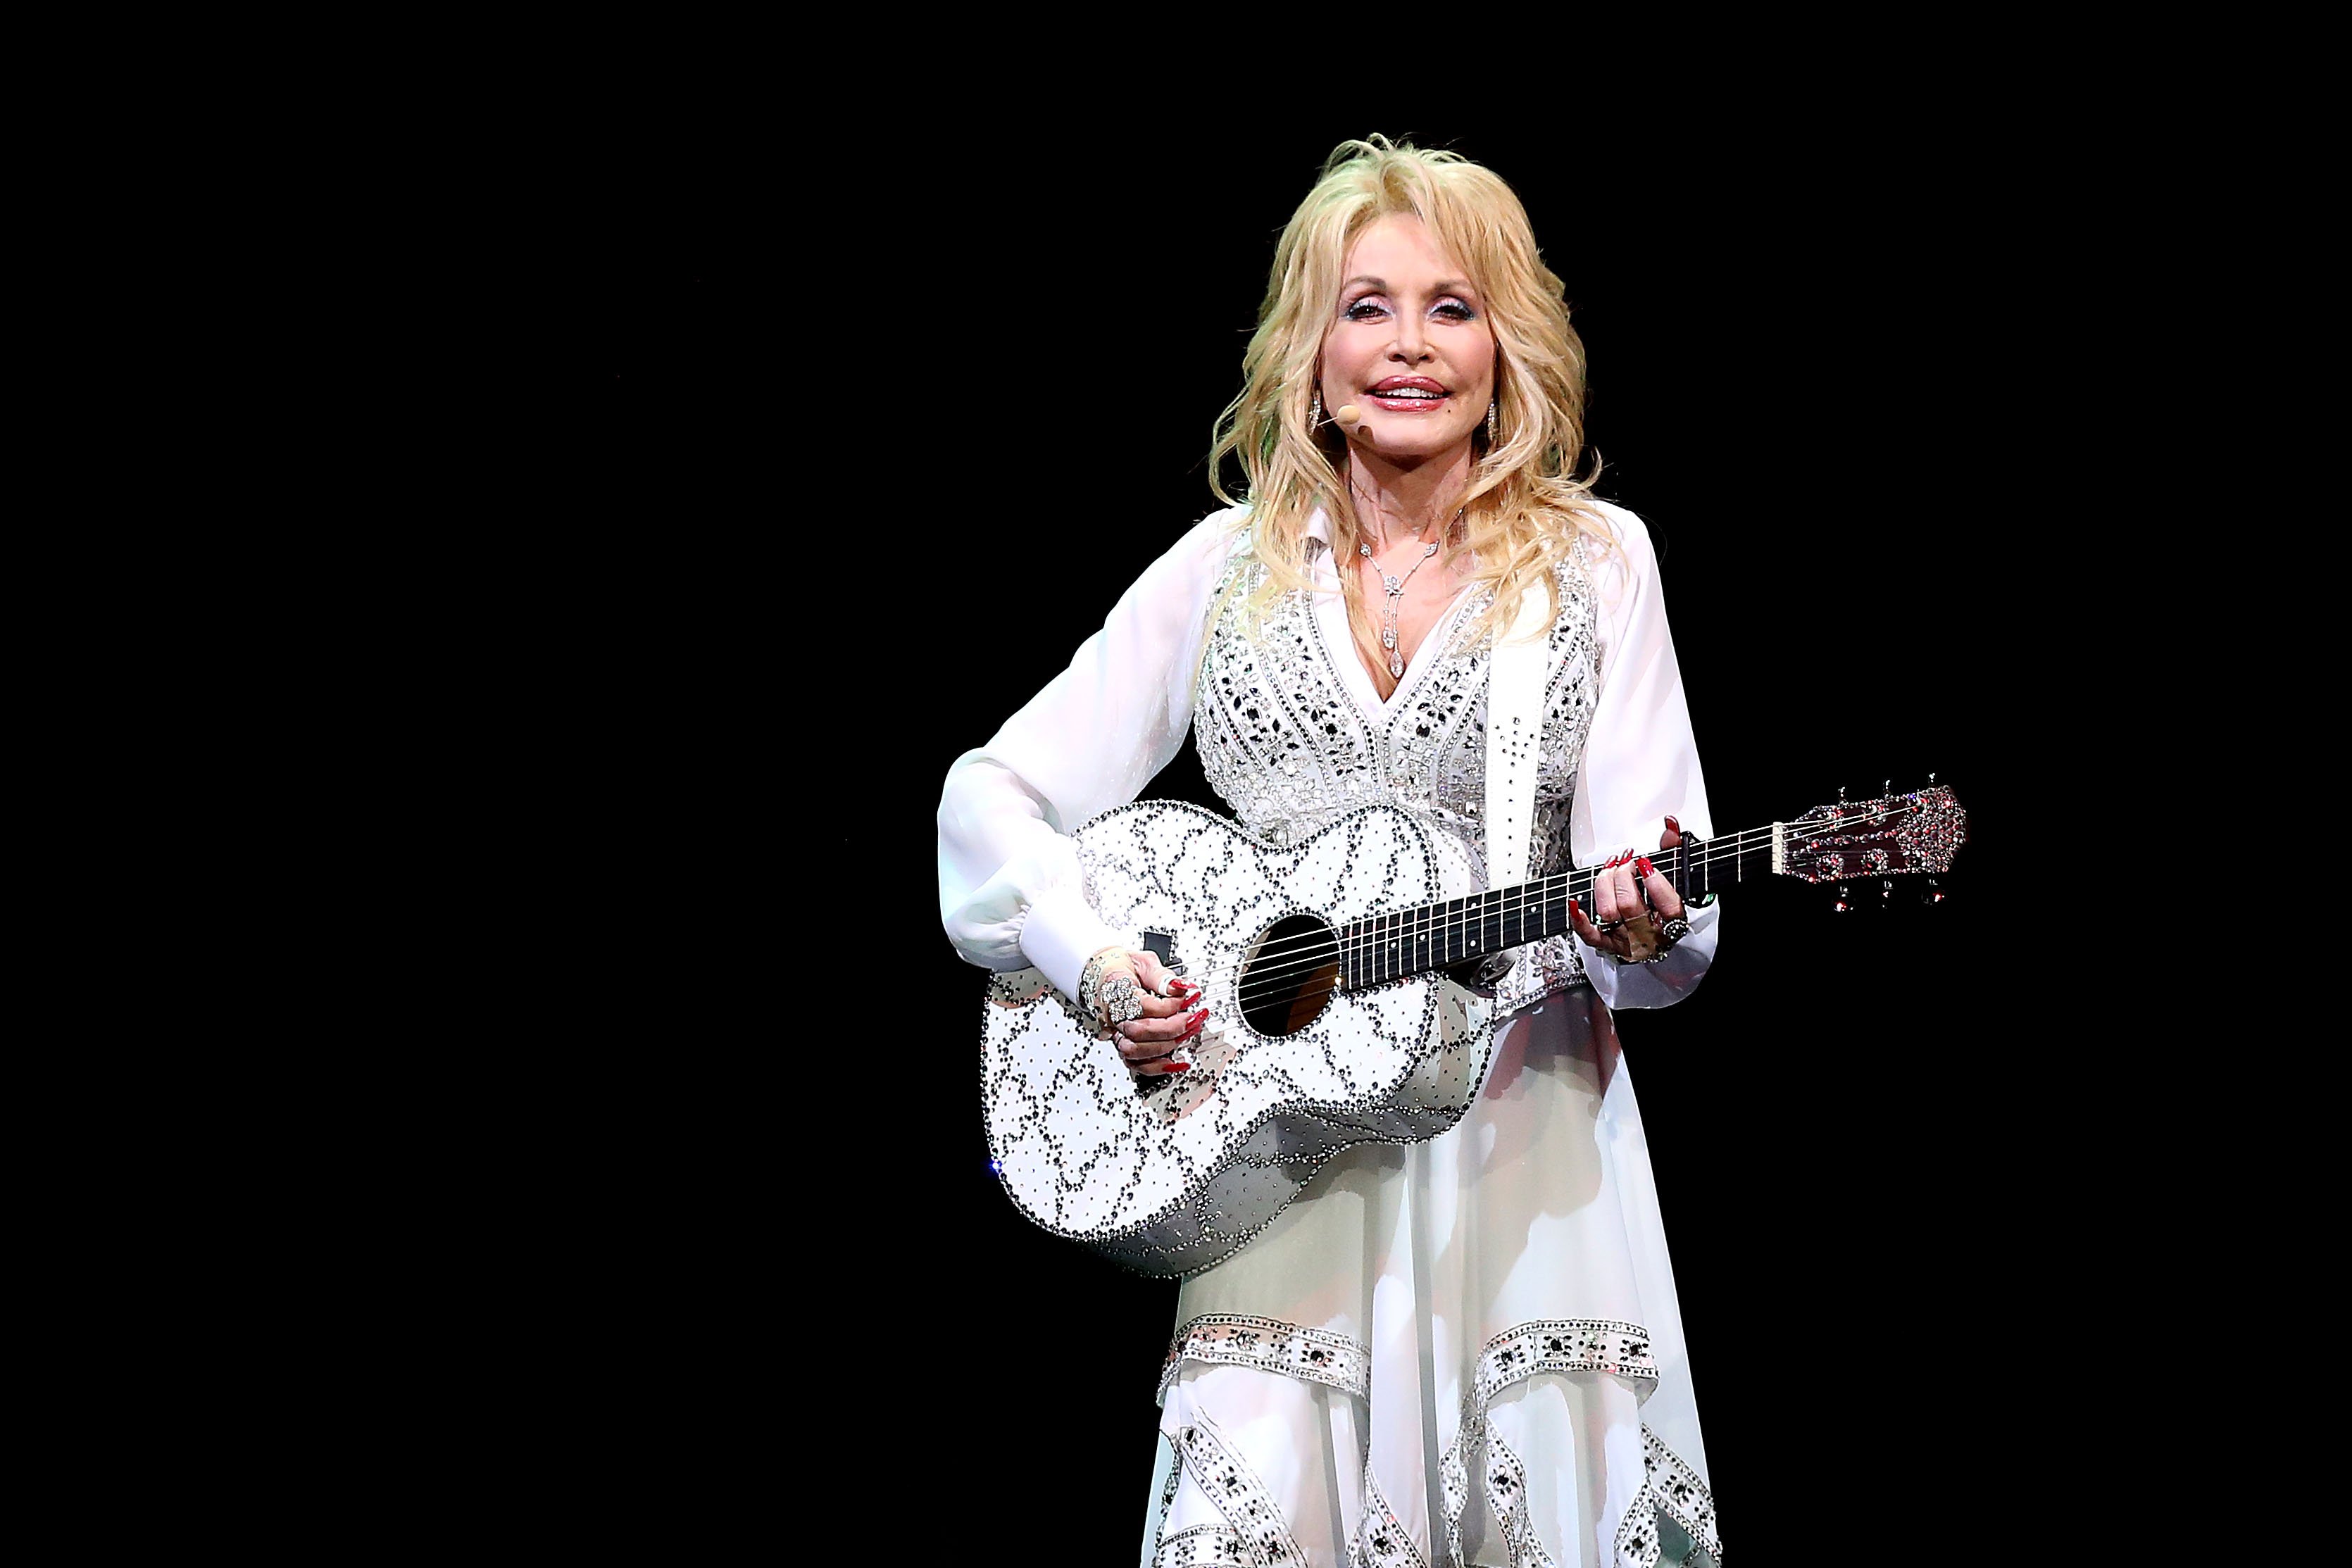 Dolly Parton performs on stage at Rod Laver Arena